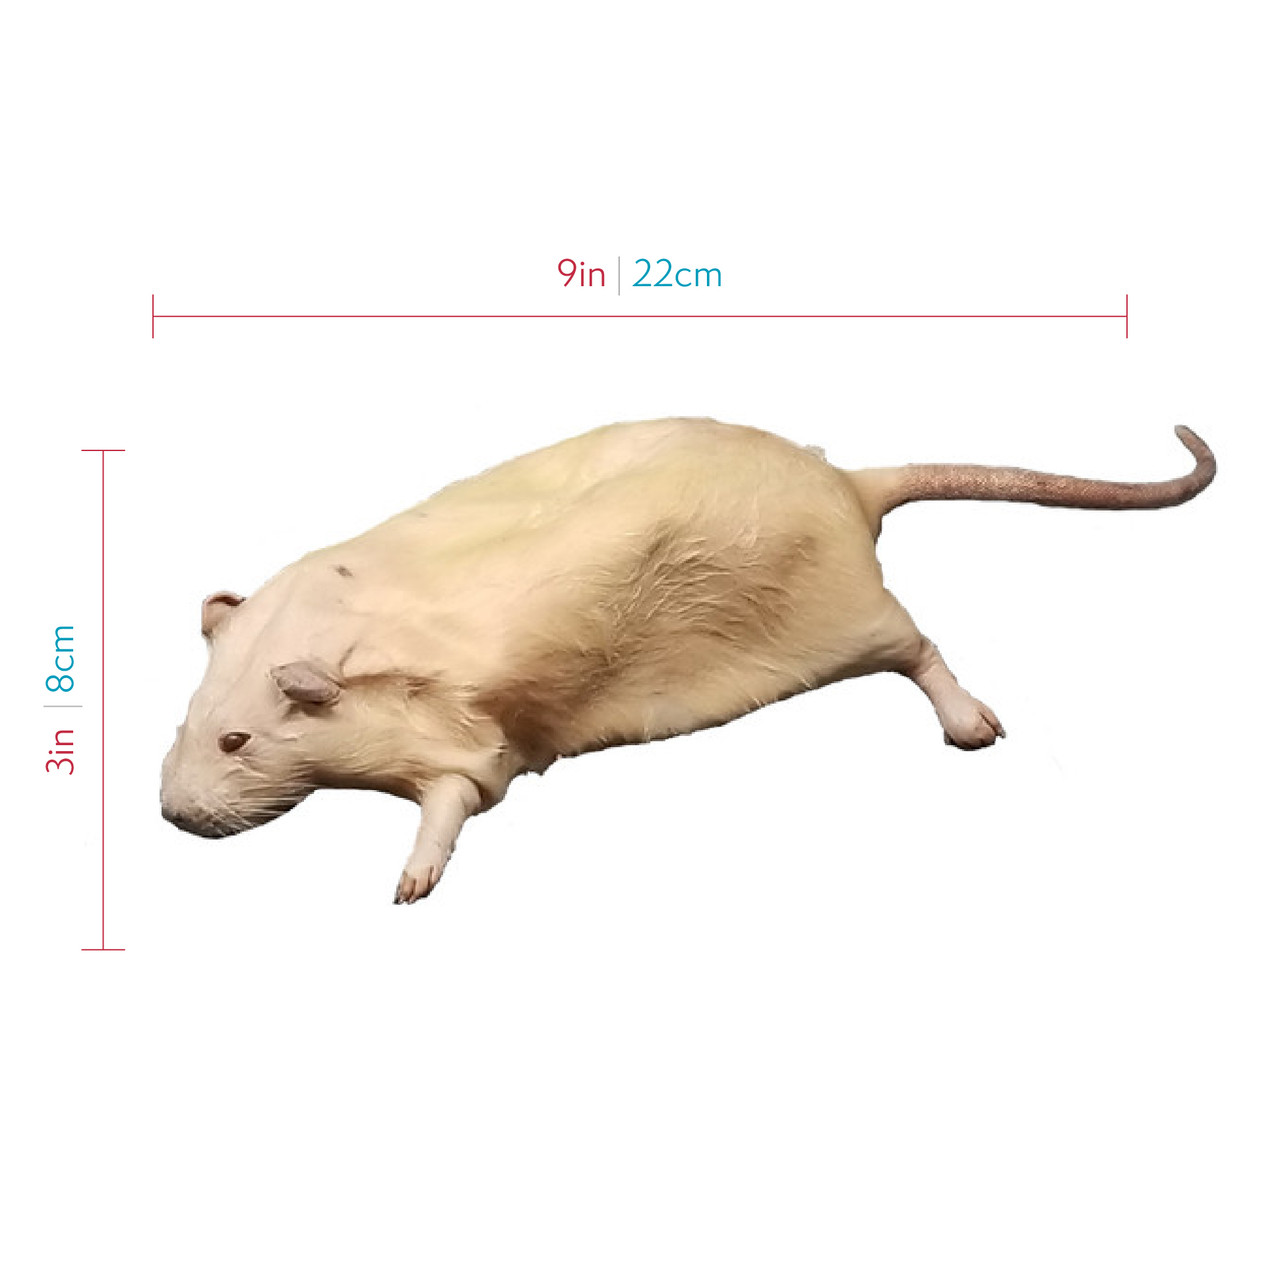 Gym Rats does a lot of things differently with its pre-workout Rat